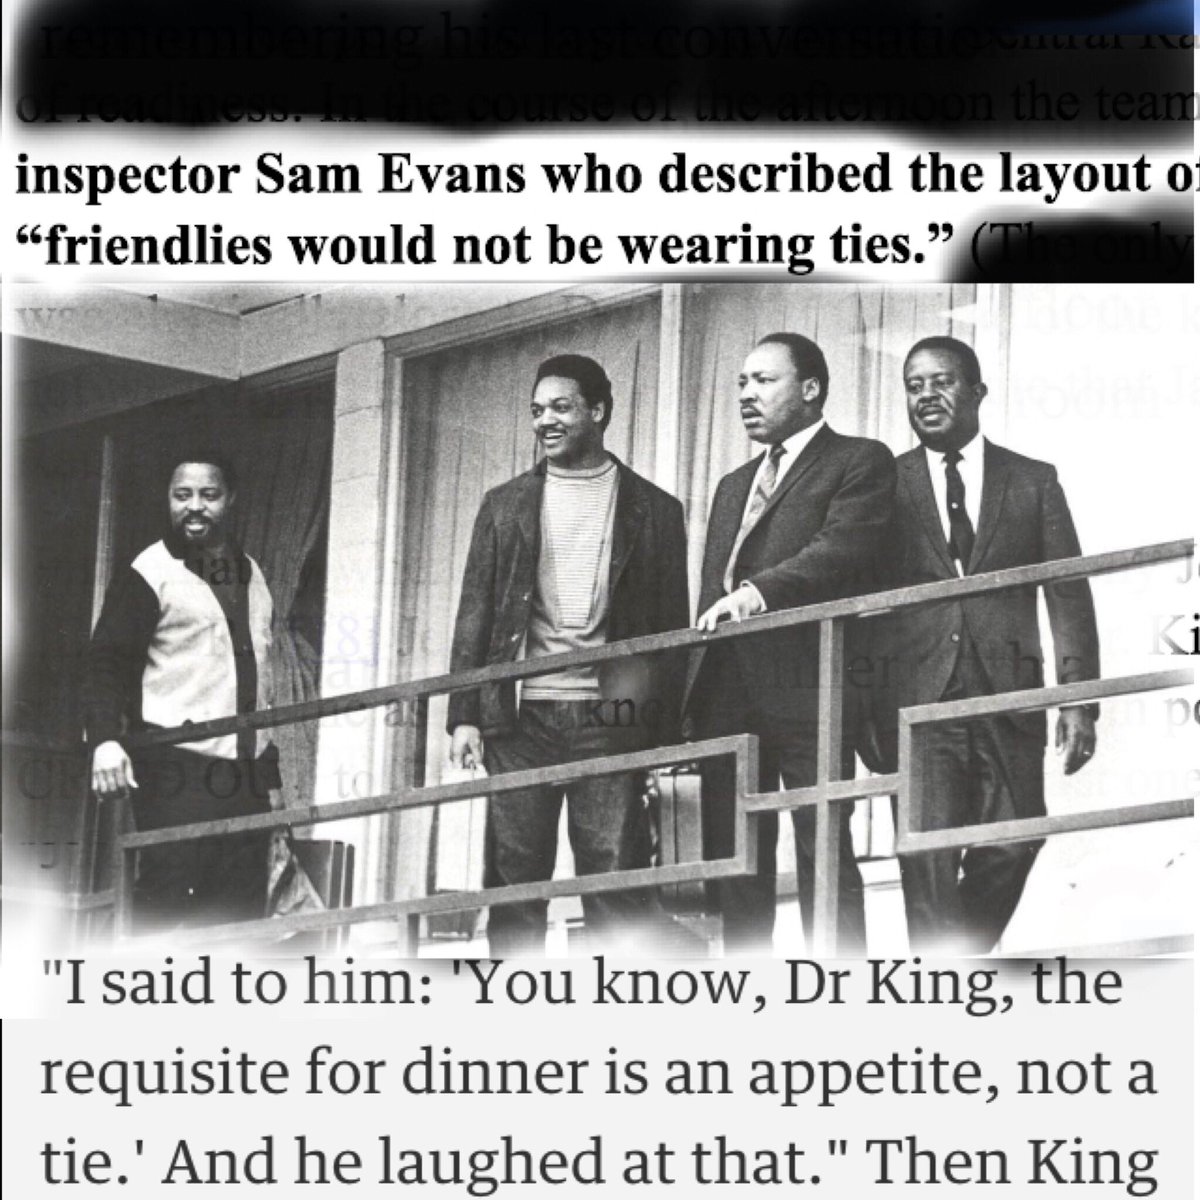 When Asked Who Next To  #DrKing Knew He Was About To Get Shot On The Lorraine Hotel Balcony A Police Inspector From Memphis Named Sam Evans Confessed That Government Friendlies Would Not Be Wearing Neck Ties The Day Of DrKing’s Assassination  #MLKDay  